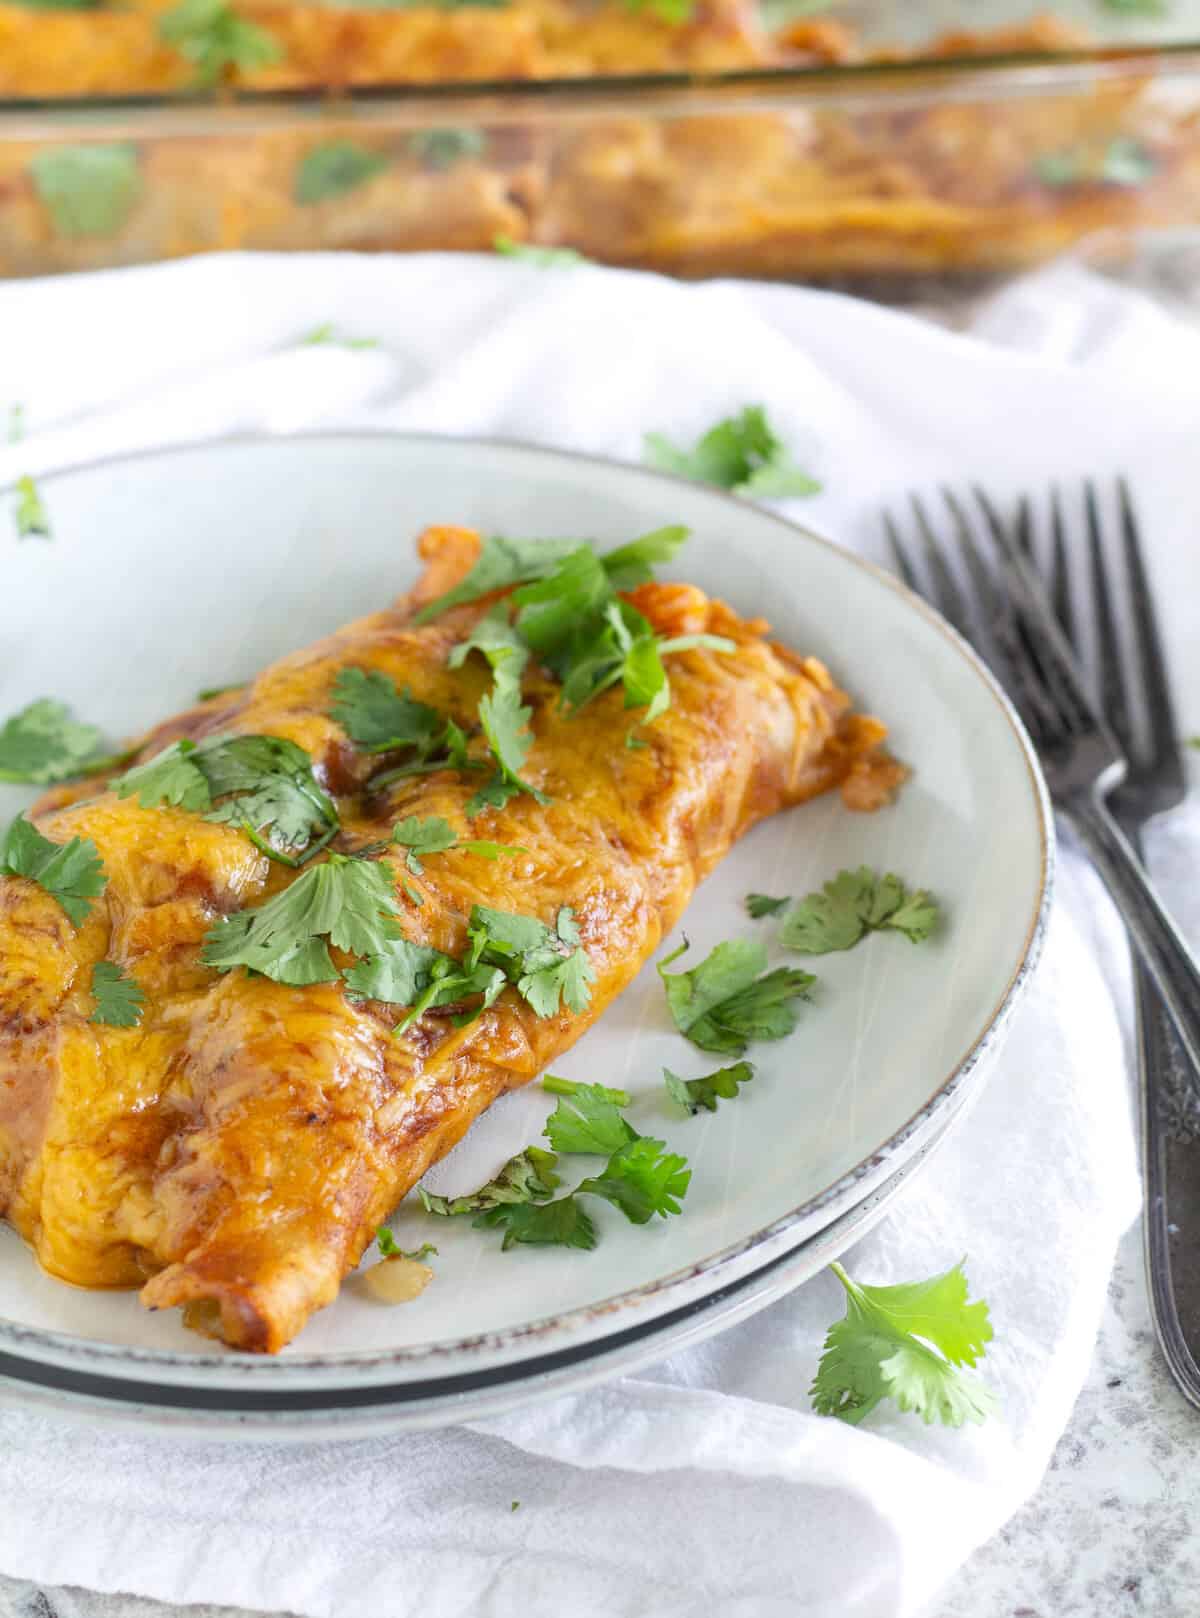 Two Beef Paleo And Keto Enchiladas on plate with cilantro sprinkled on top